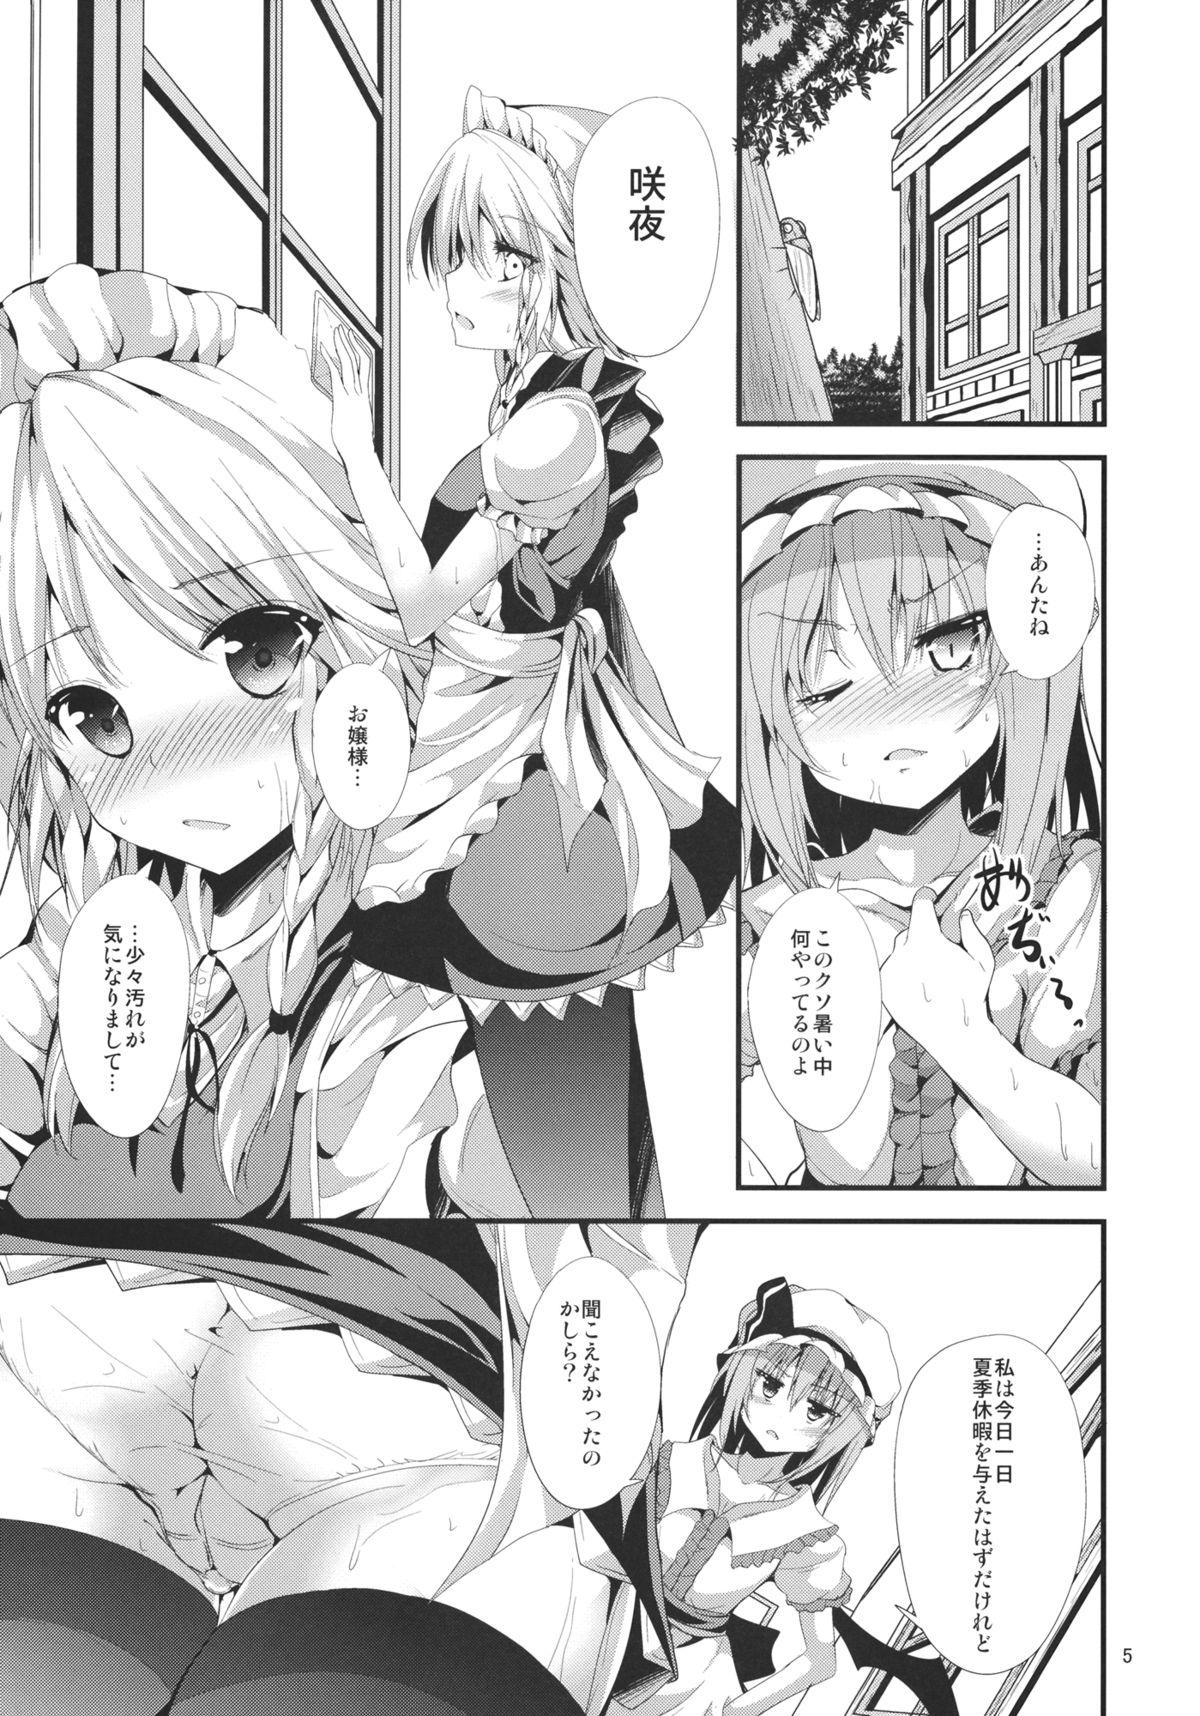 Funny Summer vacation - Touhou project Blowing - Page 2